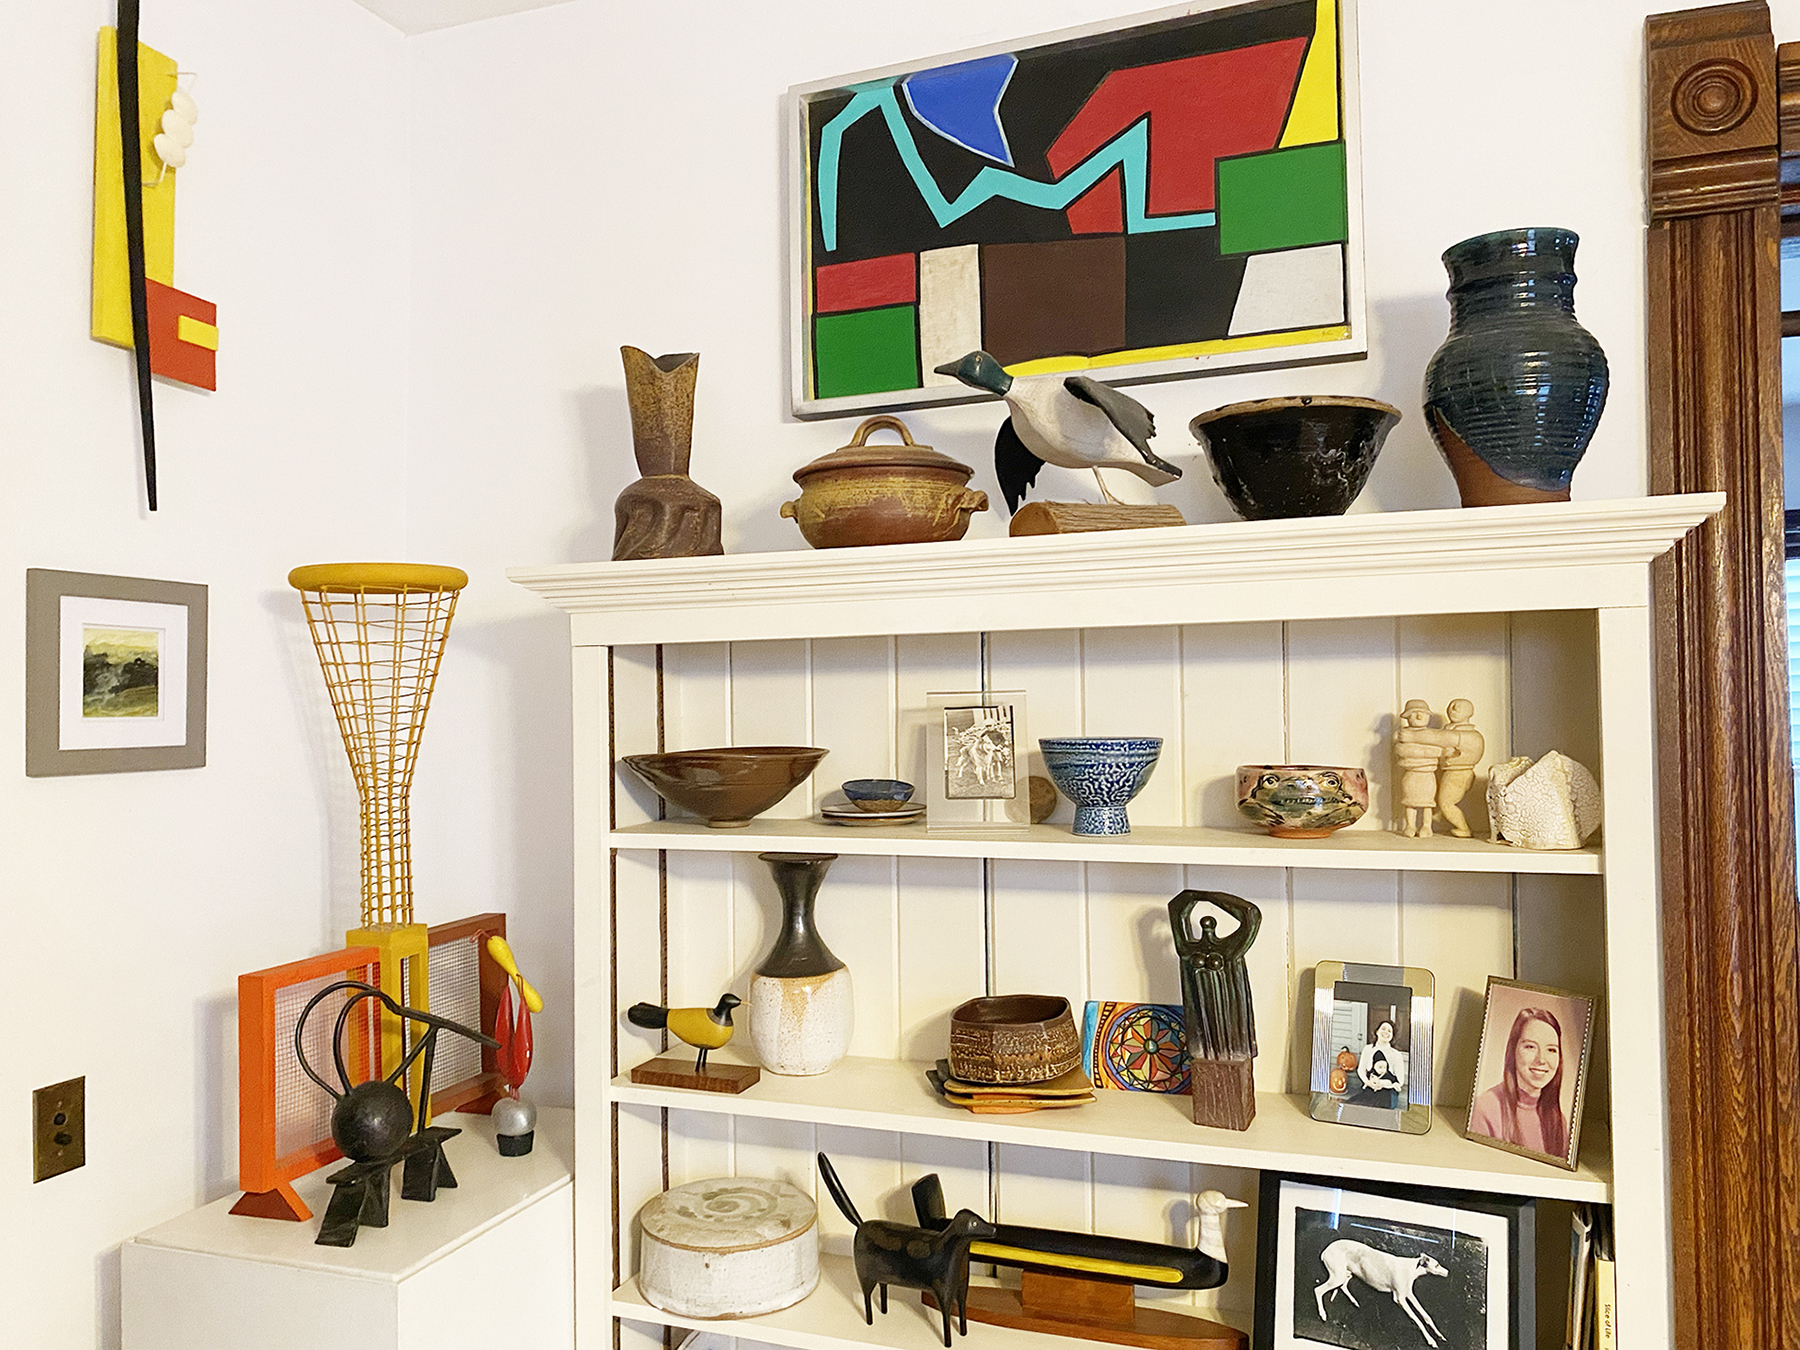 Art pieces on shelves and other storage units.